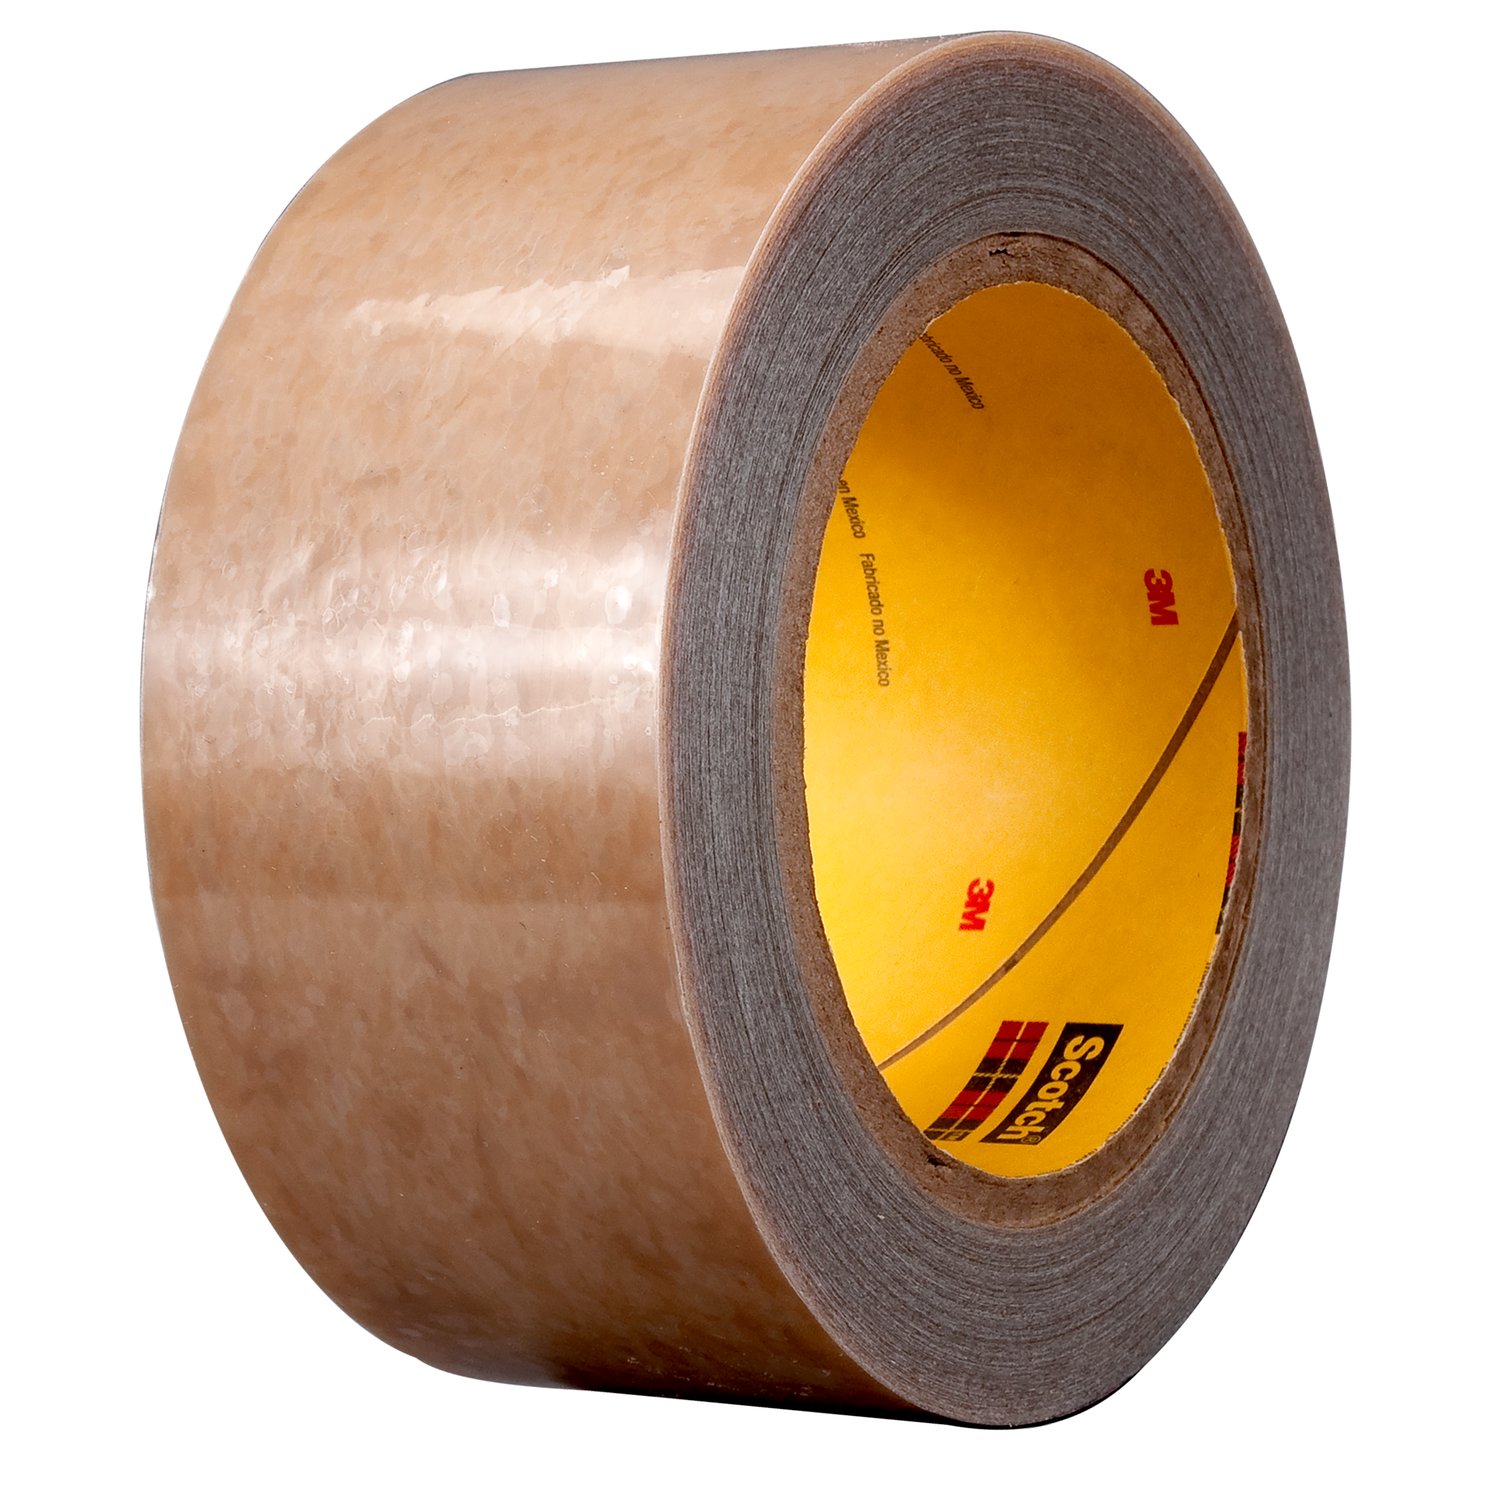 7000048449 - 3M Polyester Protective Tape 336, Transparent, 24 in x 144 yd, 1.5 mil,
1 roll per case